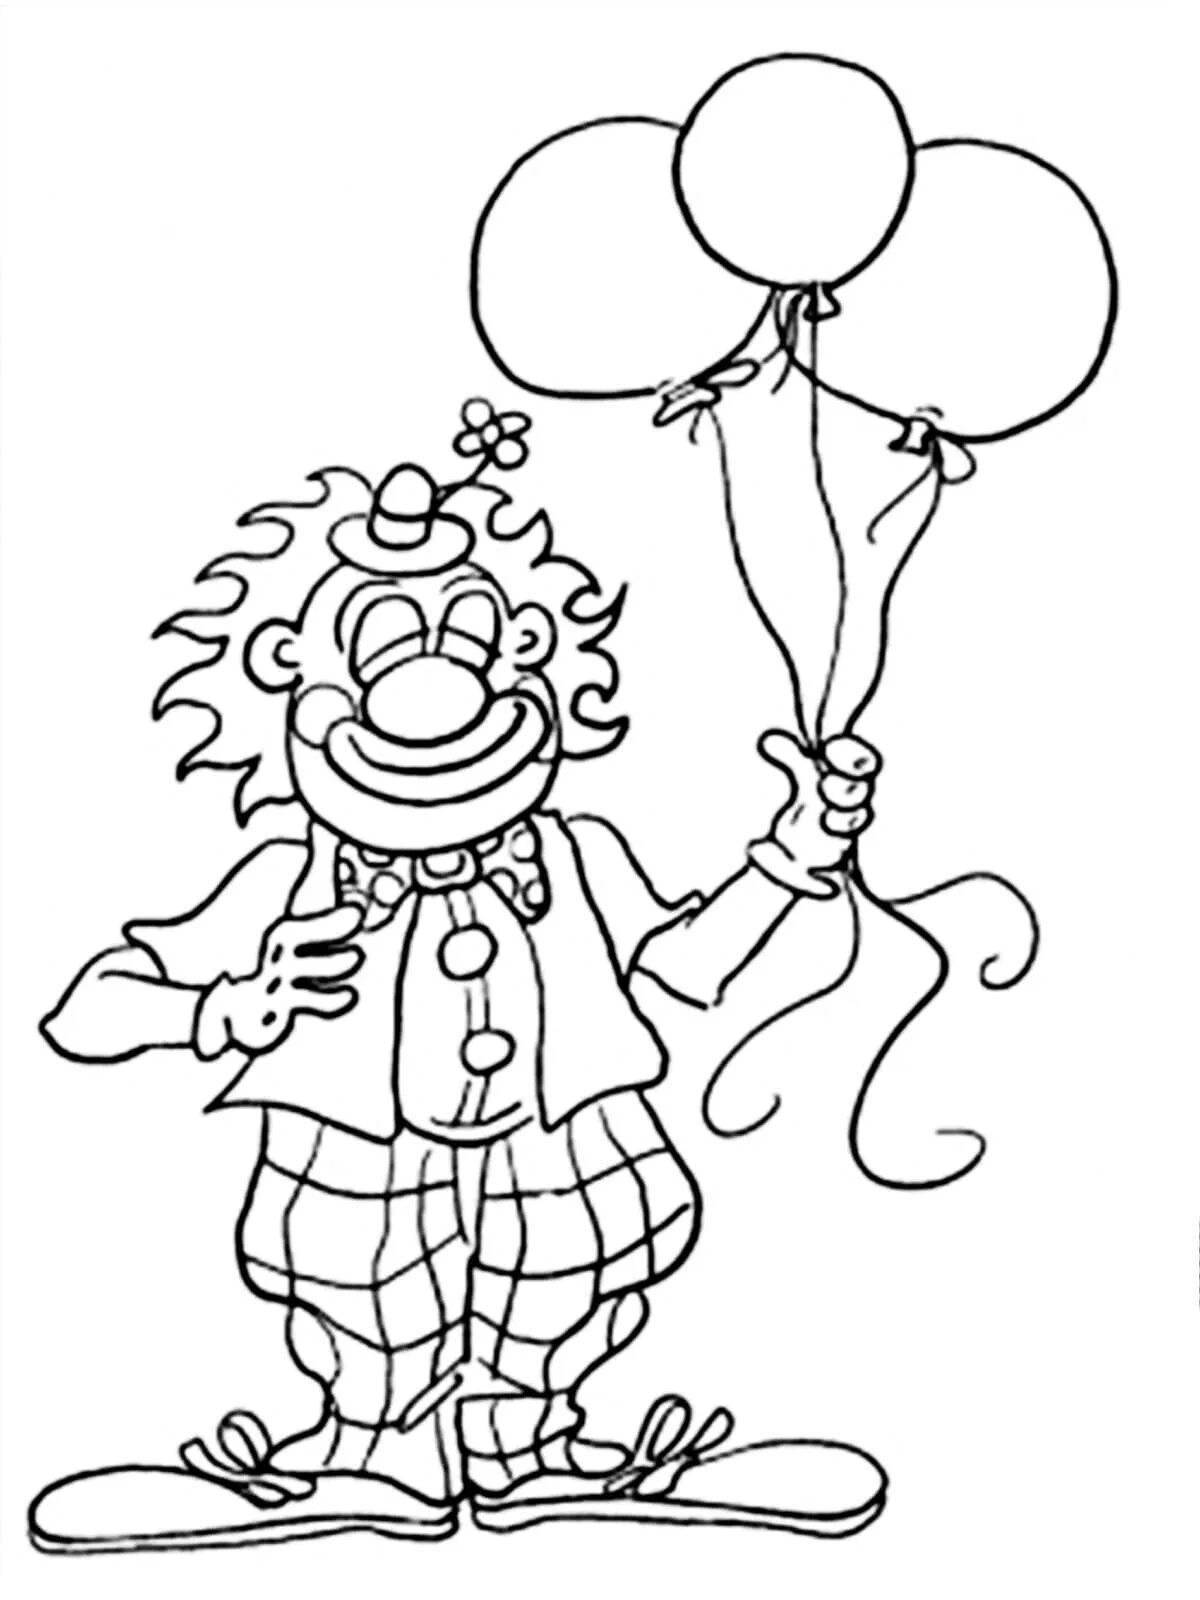 Glowing clown with balloons